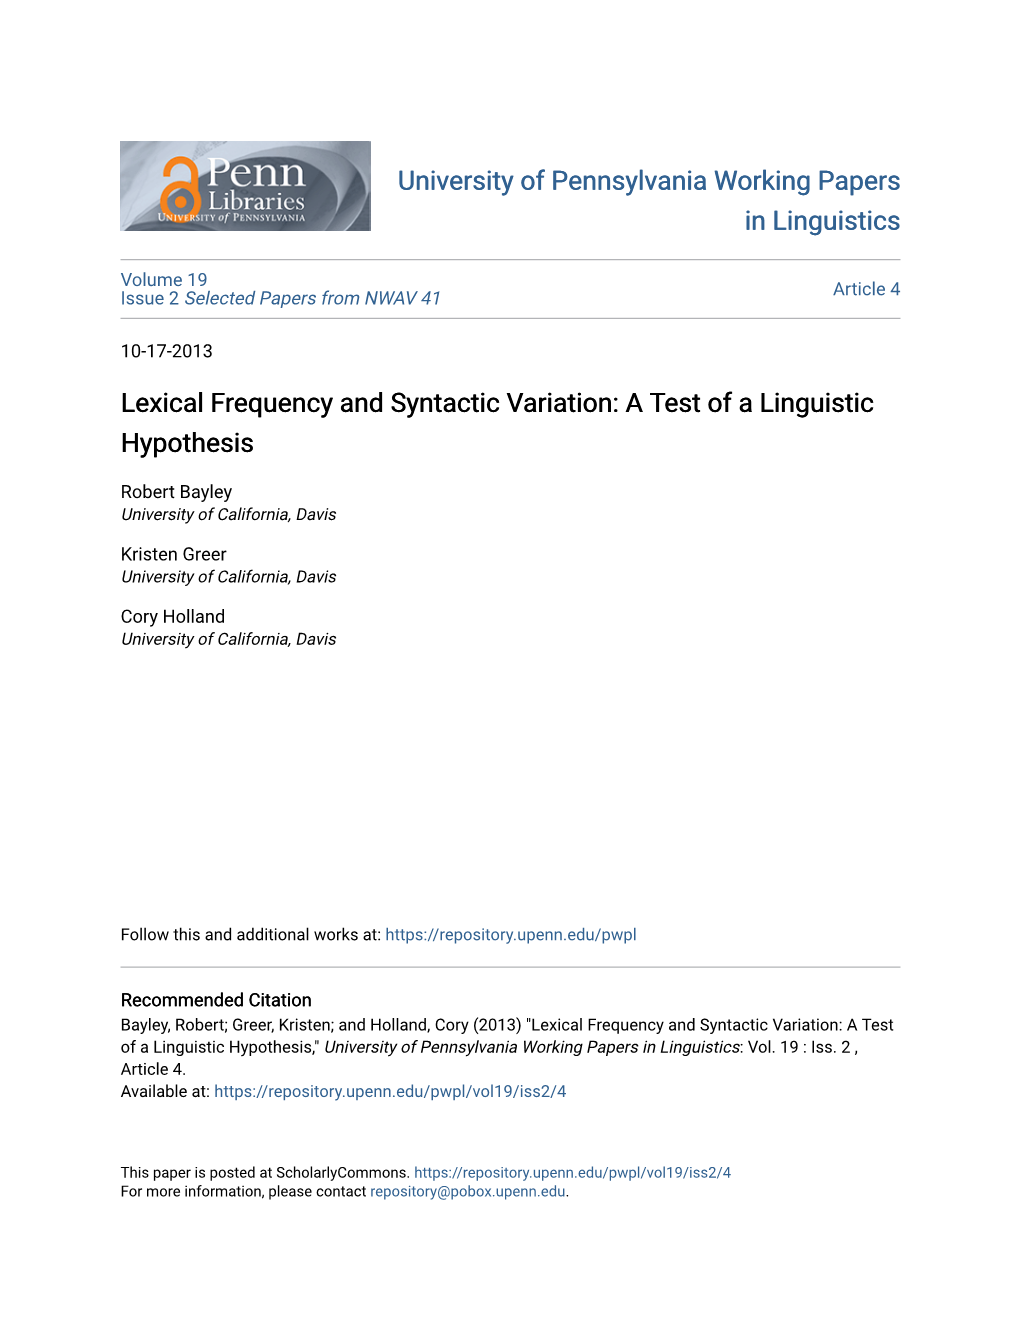 Lexical Frequency and Syntactic Variation: a Test of a Linguistic Hypothesis